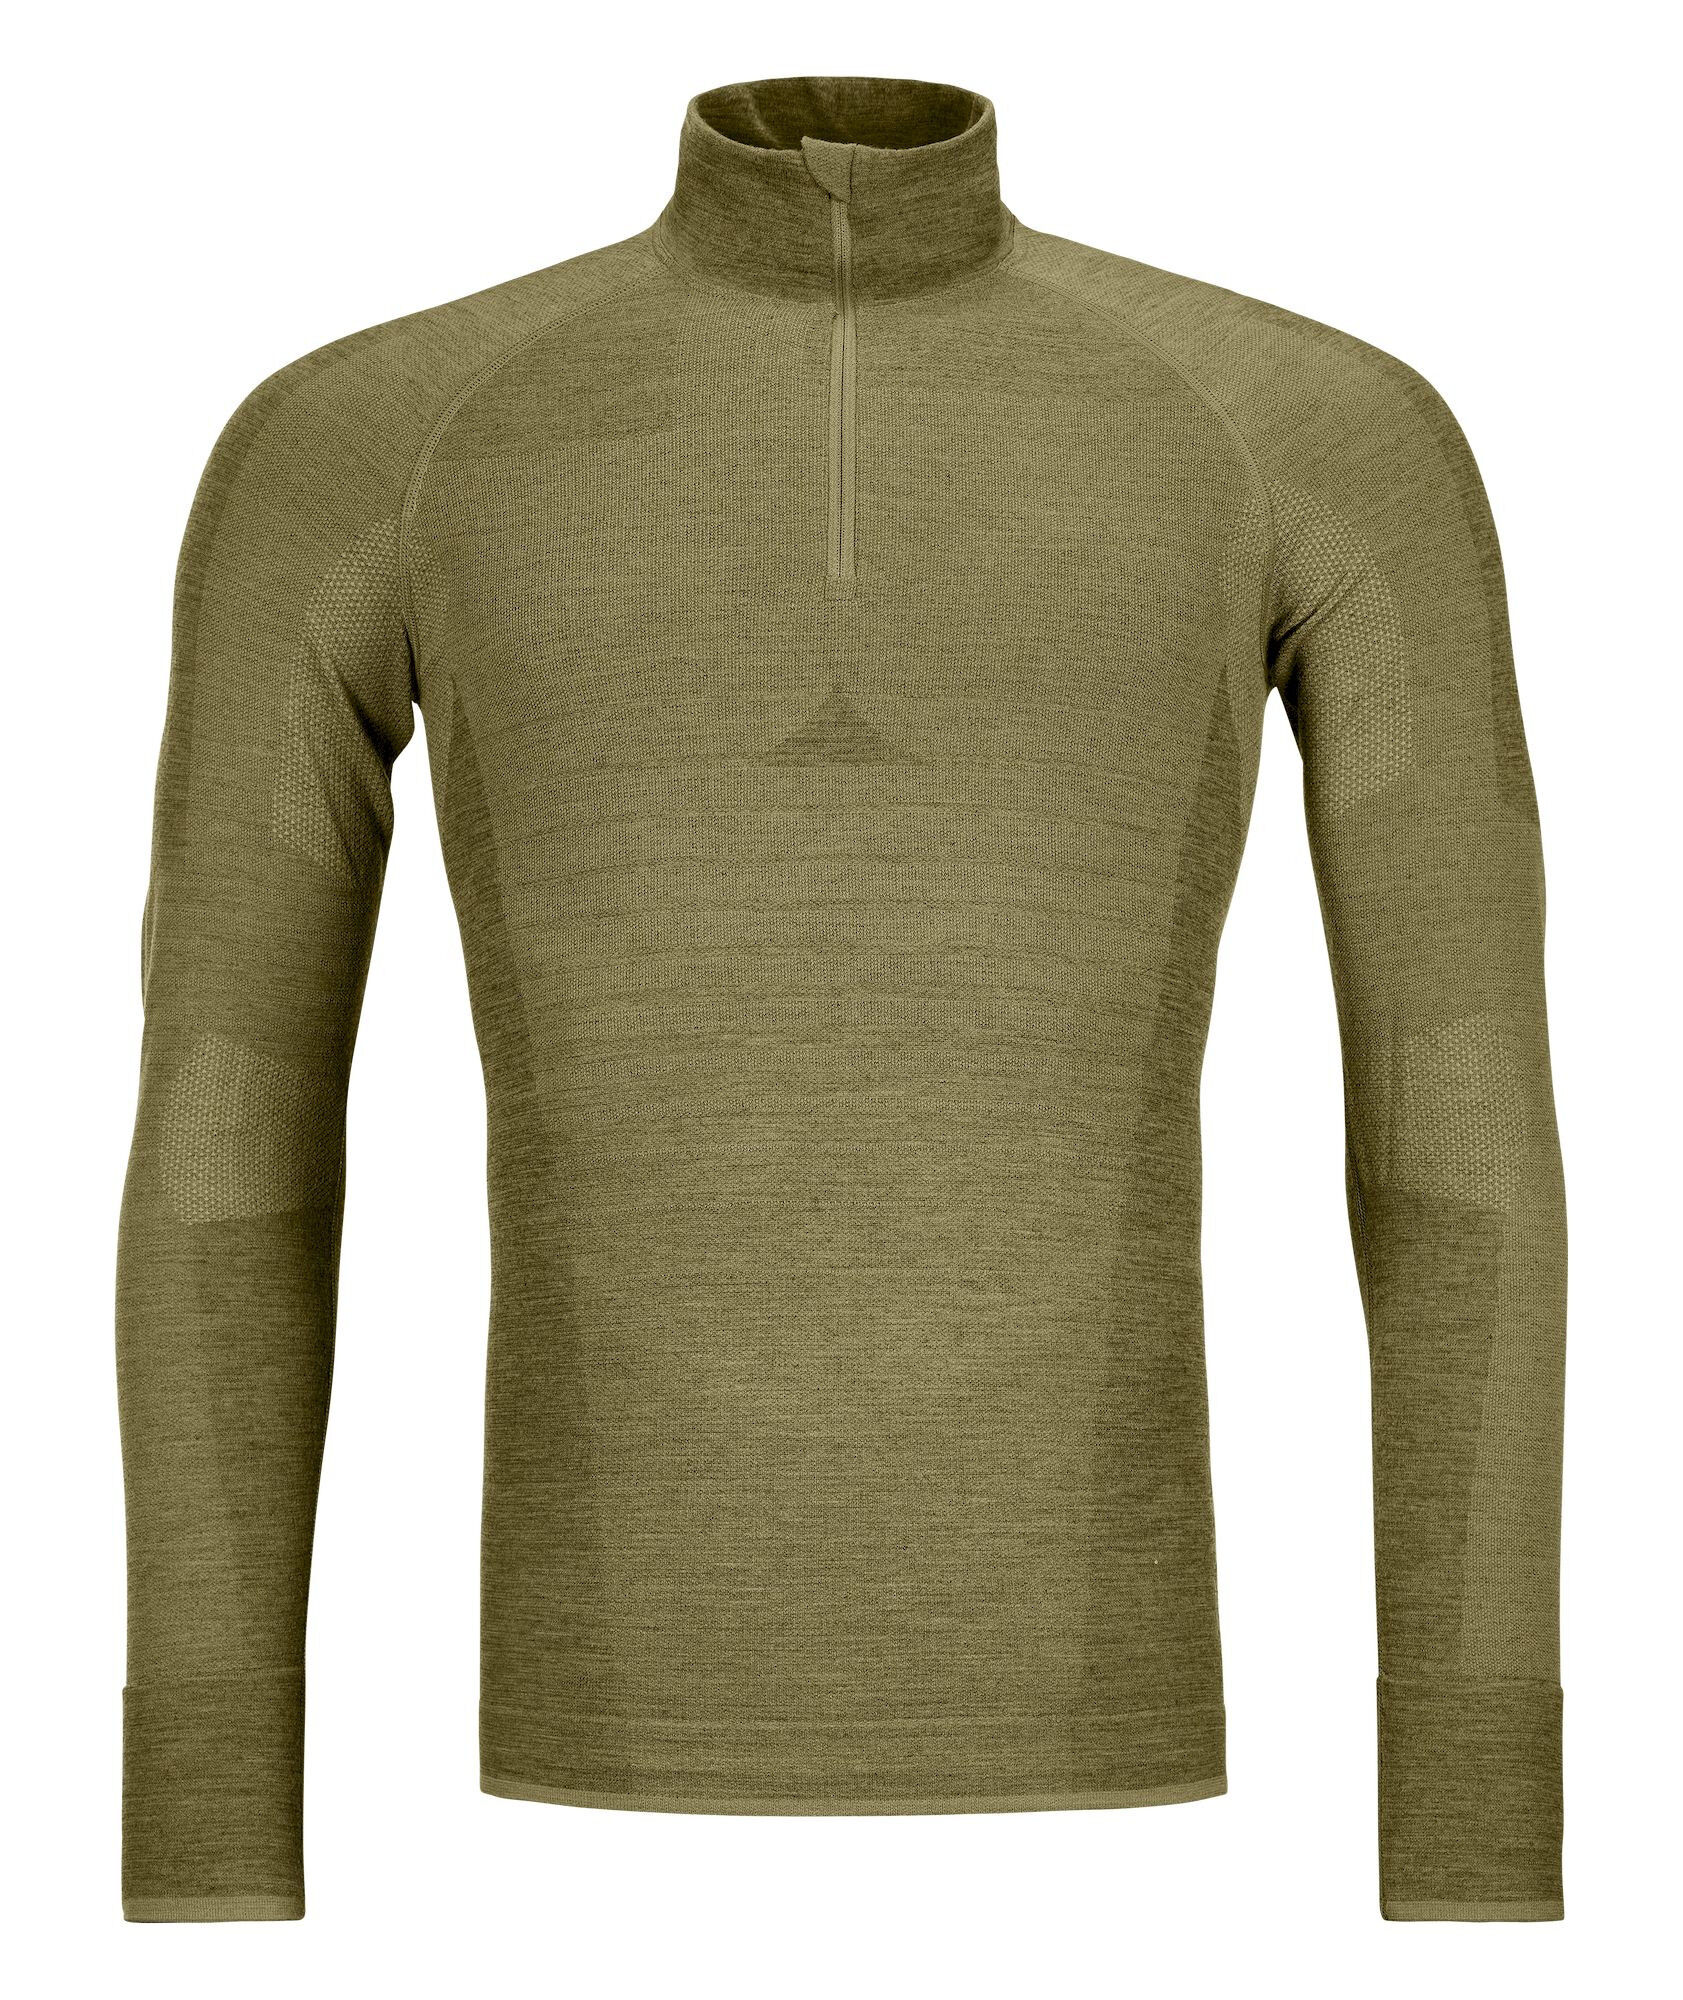 Ortovox 230 Competition Zip Neck - Base layer - Men's